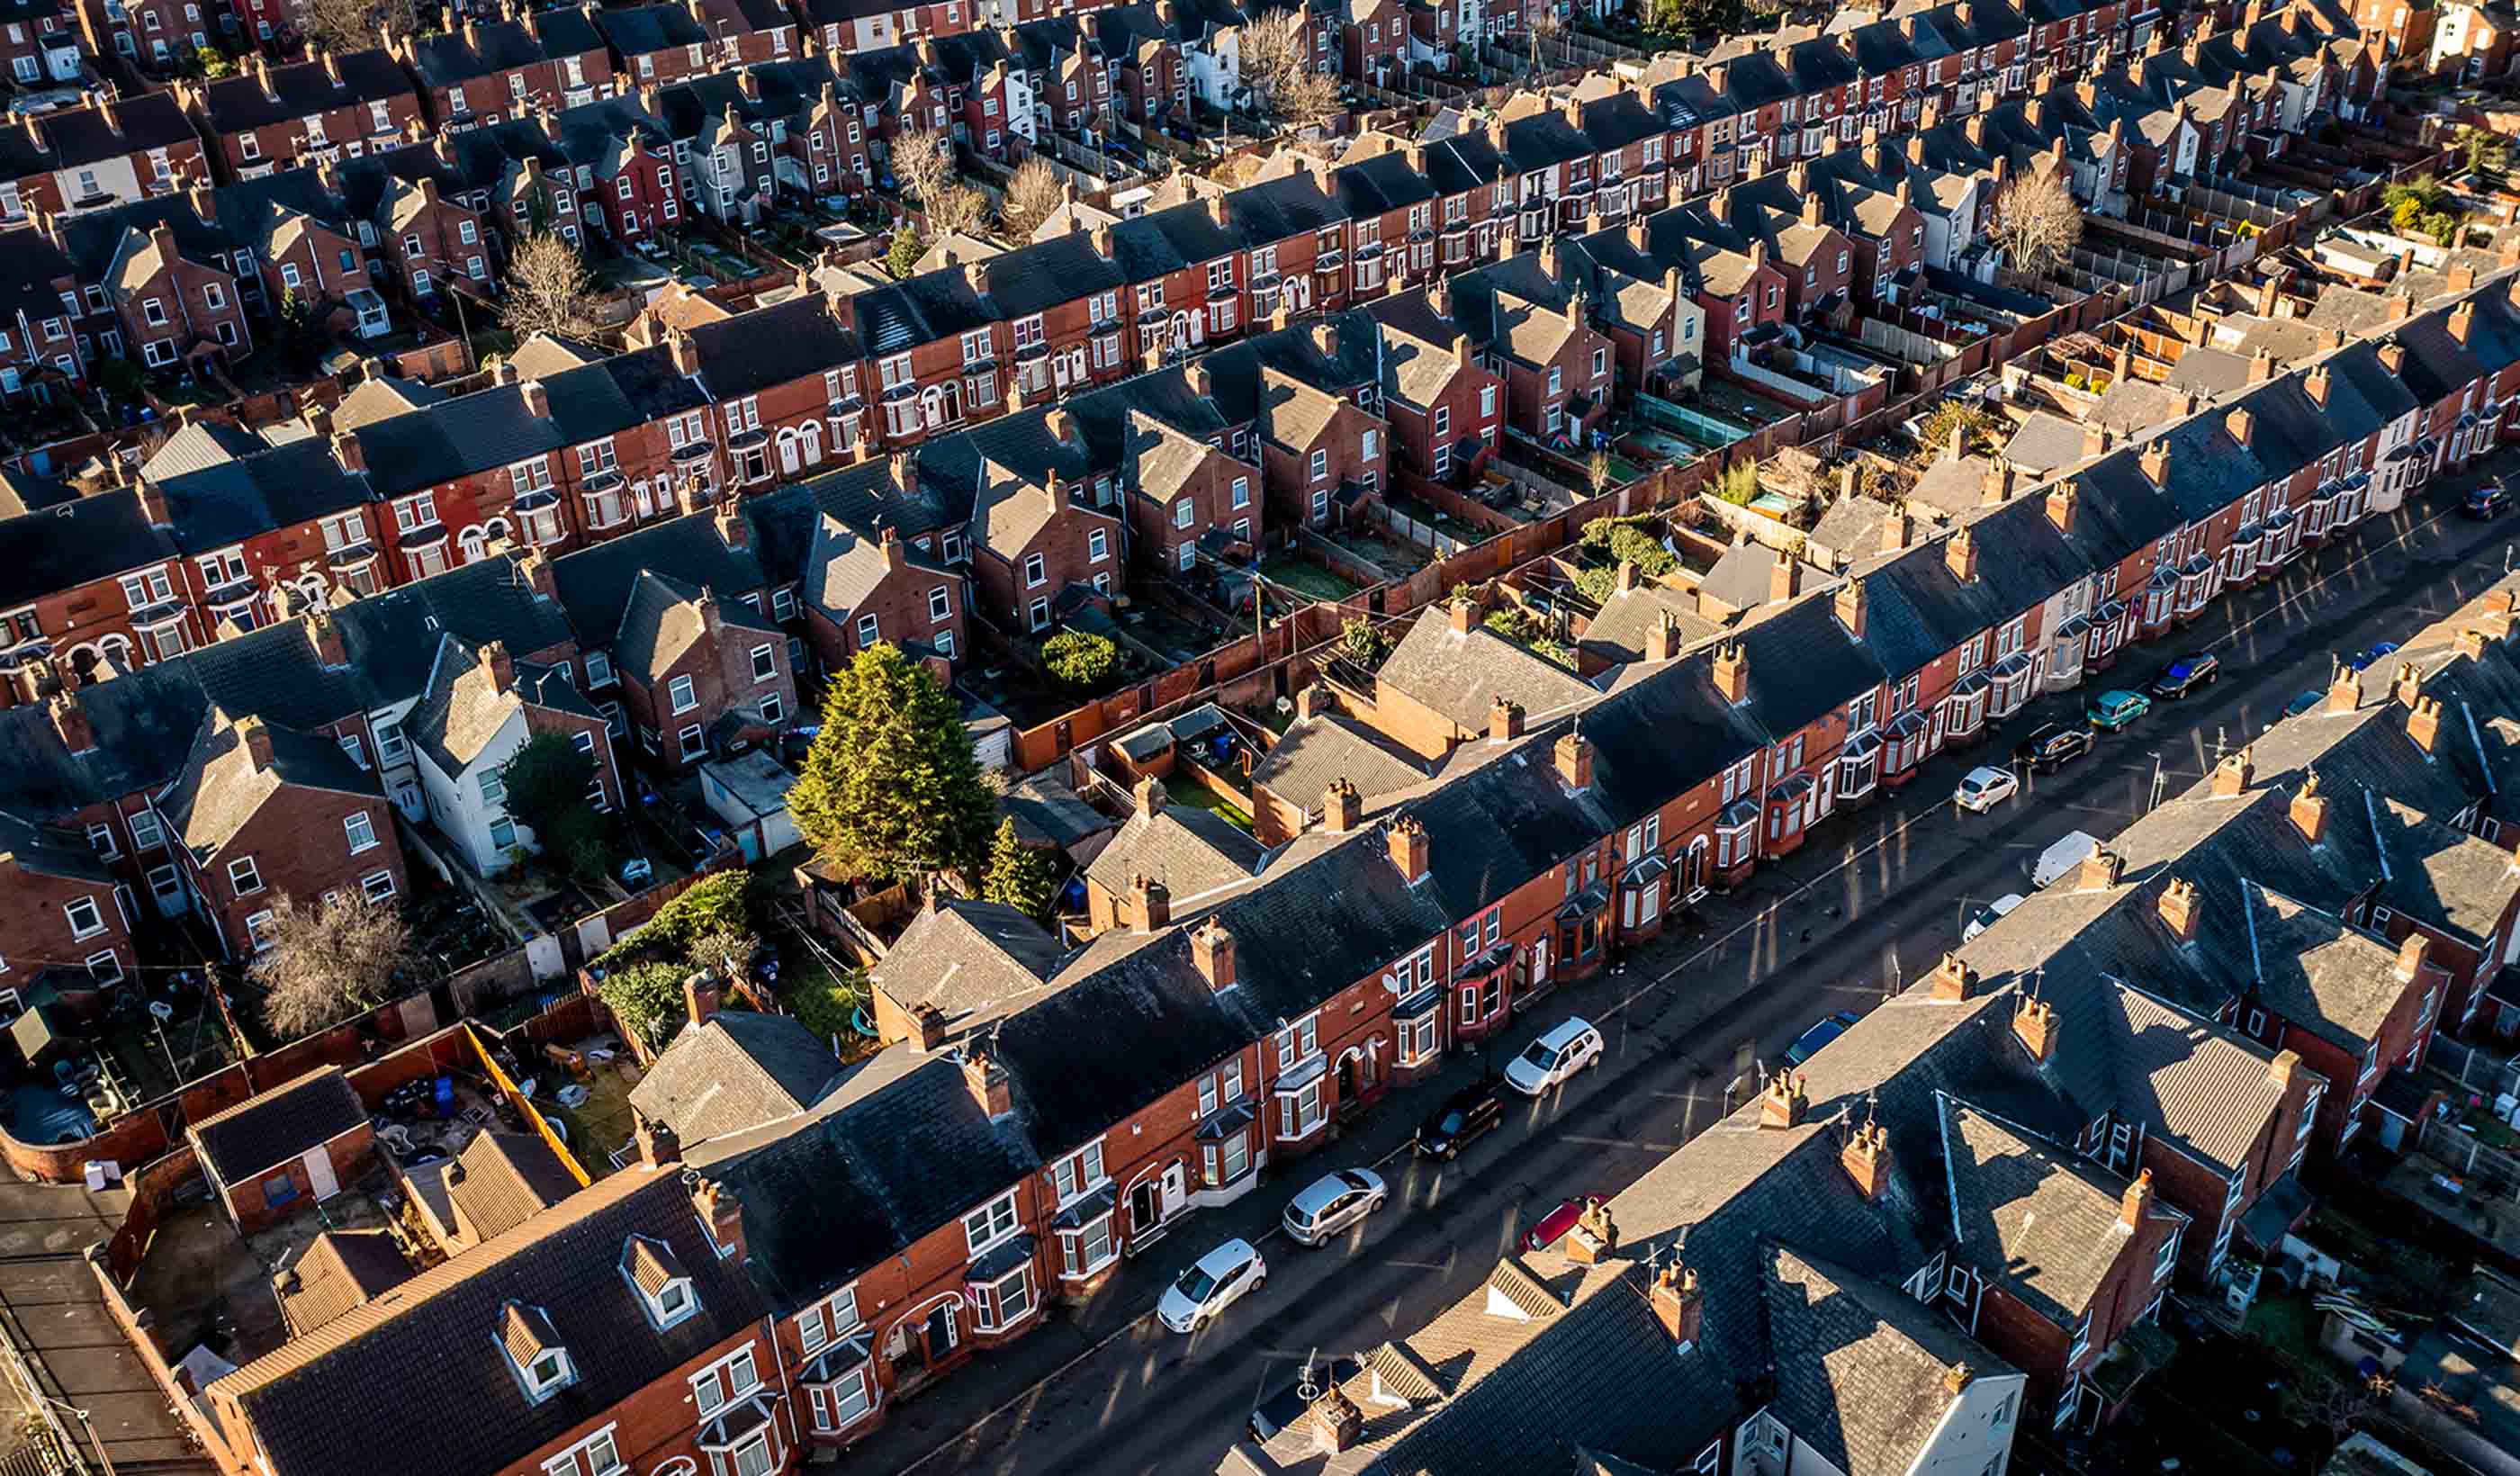 An analysis of England’s local housing needs in 2024 by Stantec’s Development Economics team